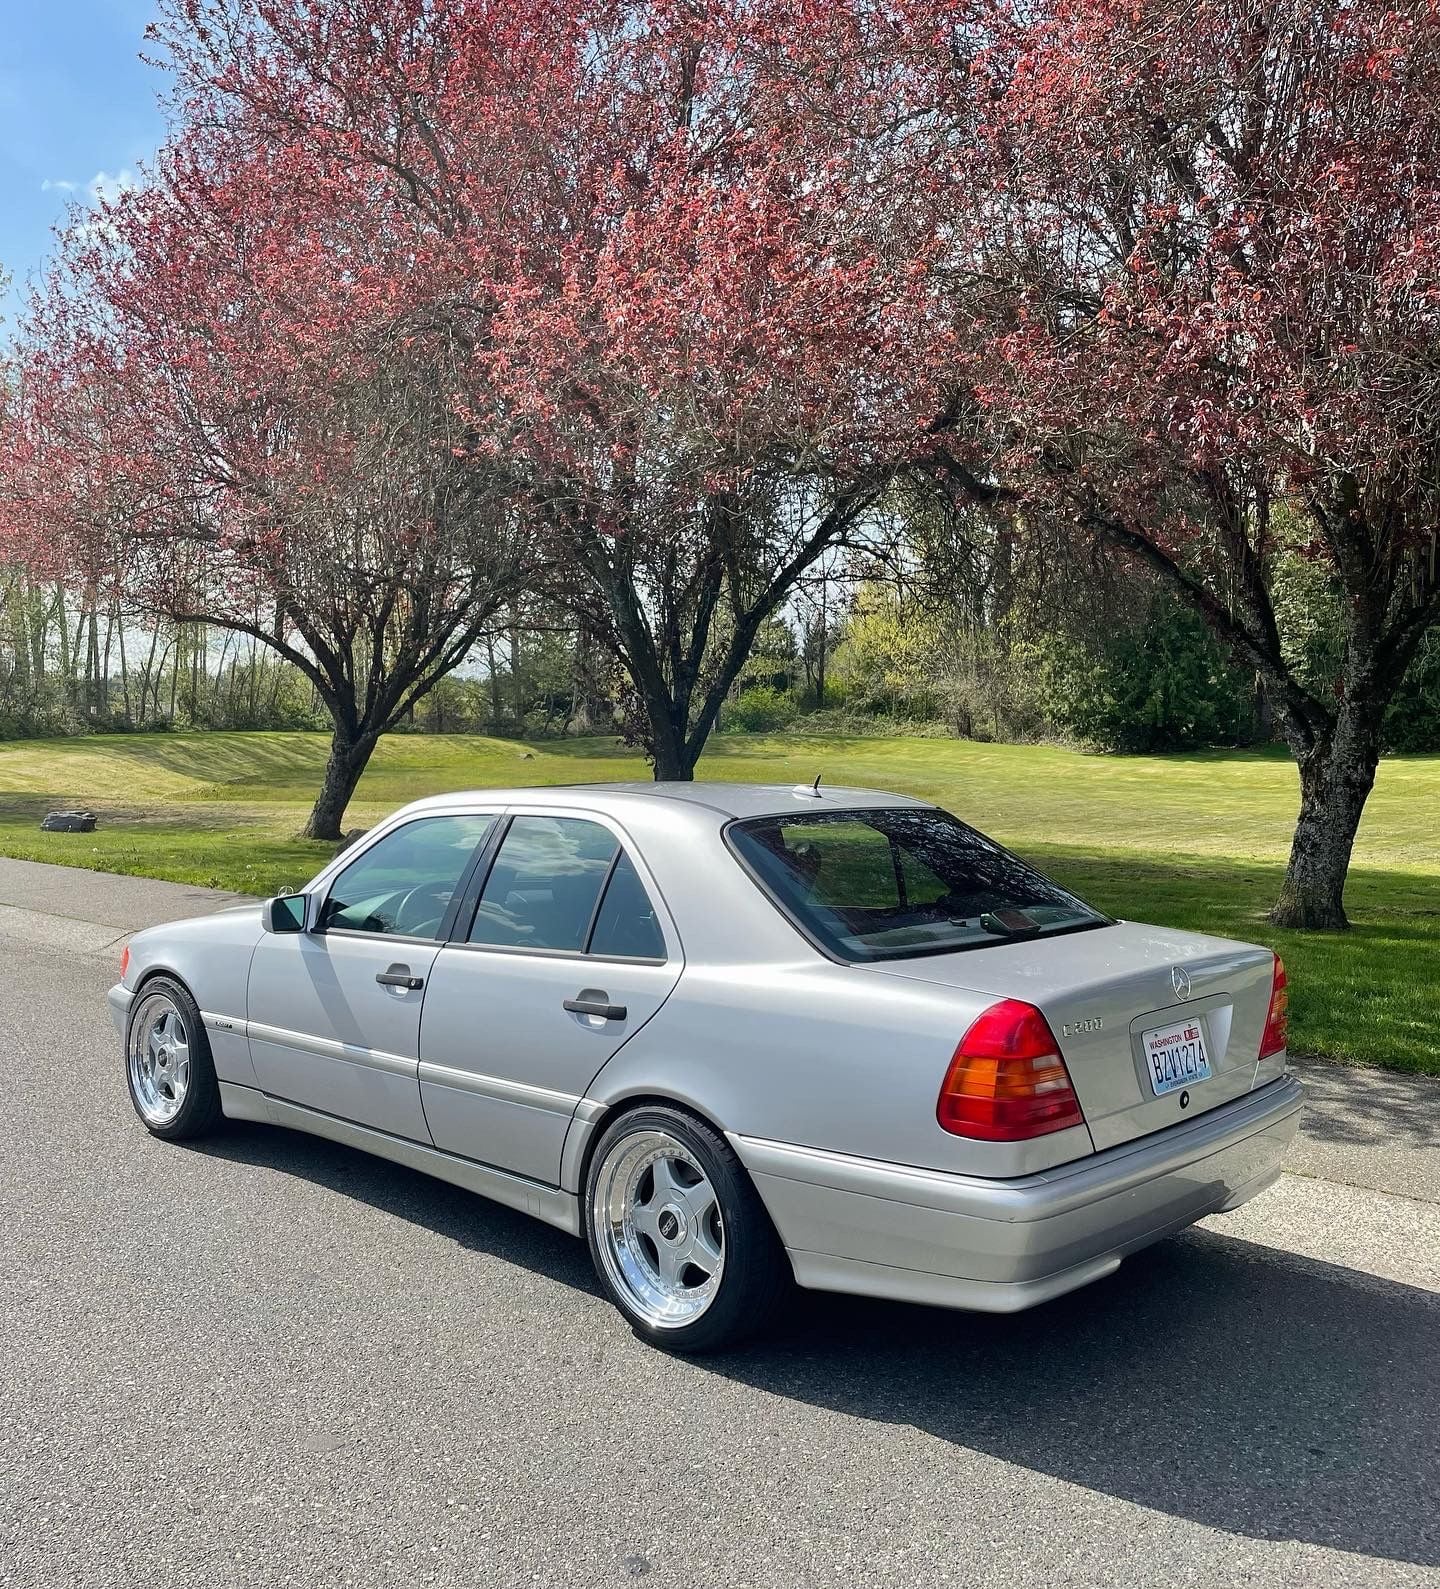 Wheels and Tires/Axles - 17” BBS RF 3 Piece Wheels & Tires - Used - 1994 to 2000 Mercedes-Benz C280 - Everett, WA 98208, United States